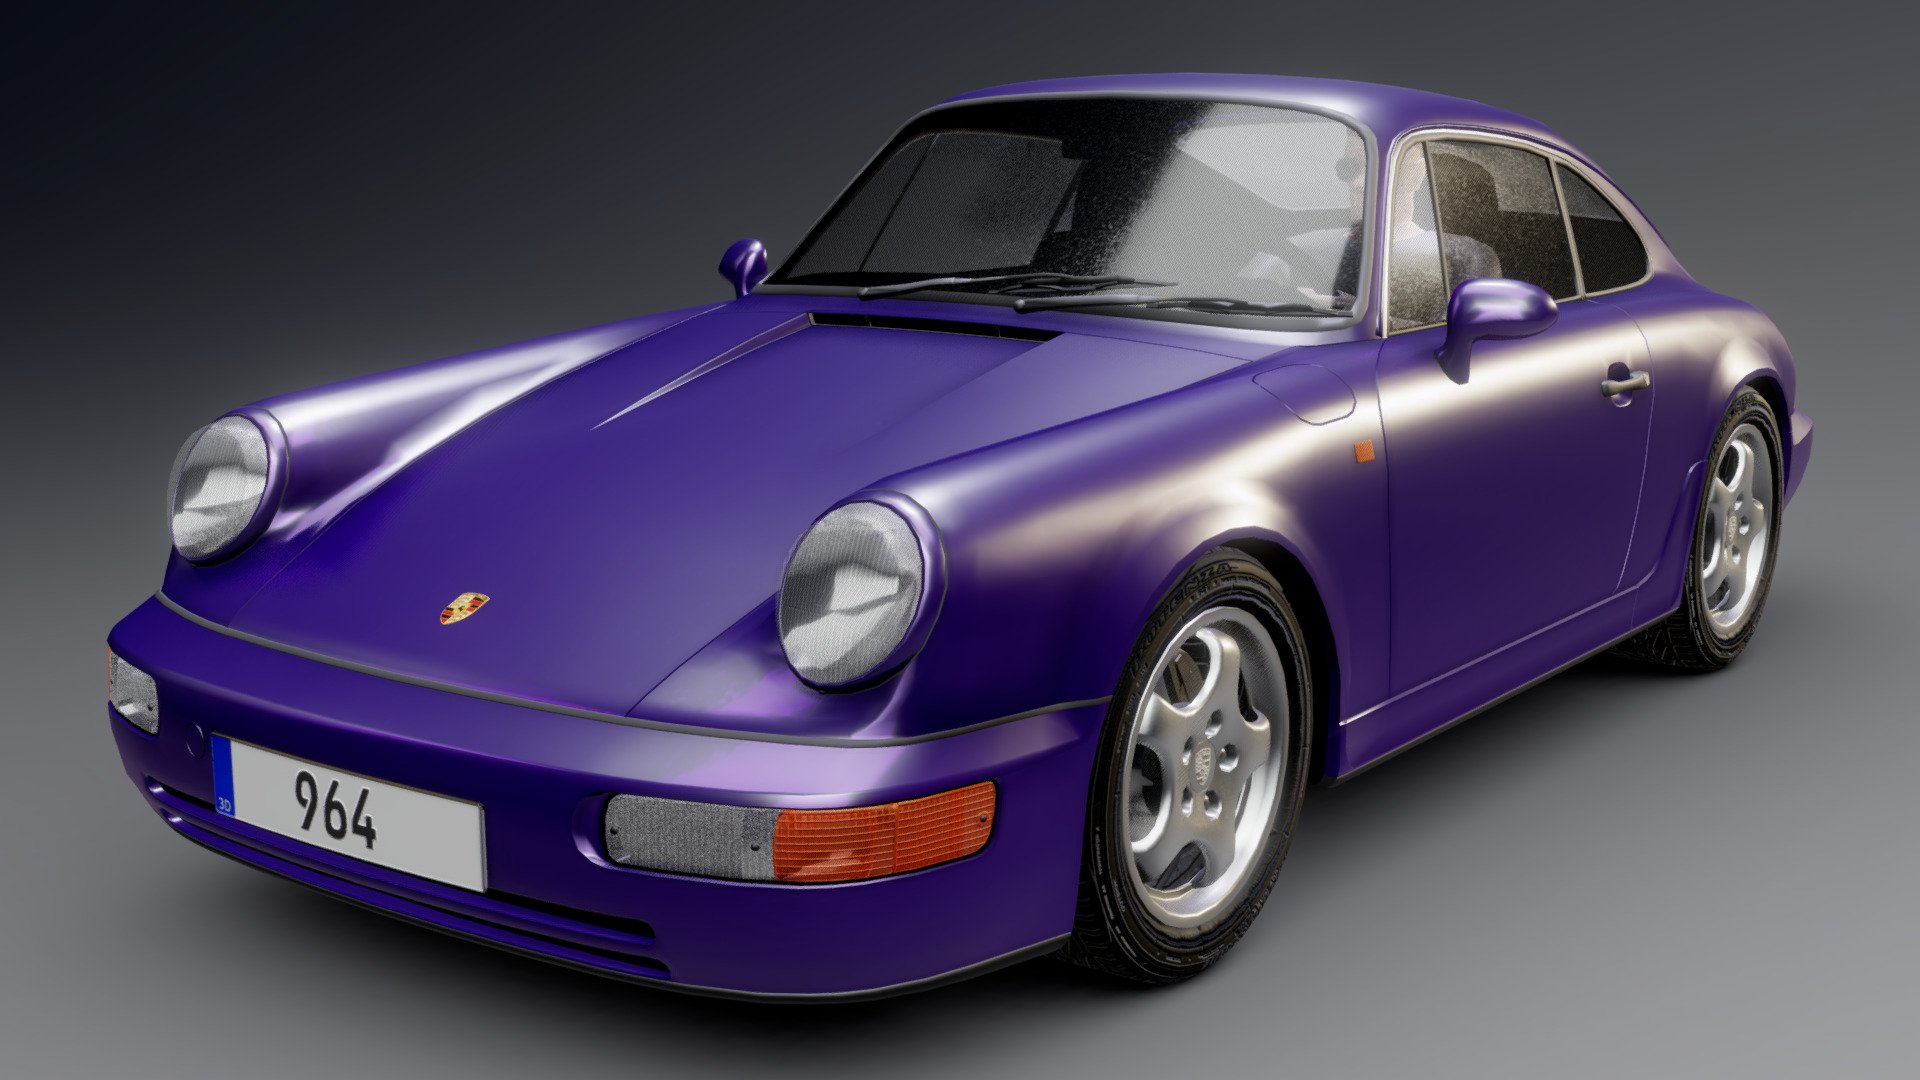 Get your sunglasses and late 80's, early 90's tapes ready.
This is the Porsche 911 964 carrera 2, or atleast something close to it, wanted to use the carrera badge cause the 911 badge on the 964 looks god awful 3d model